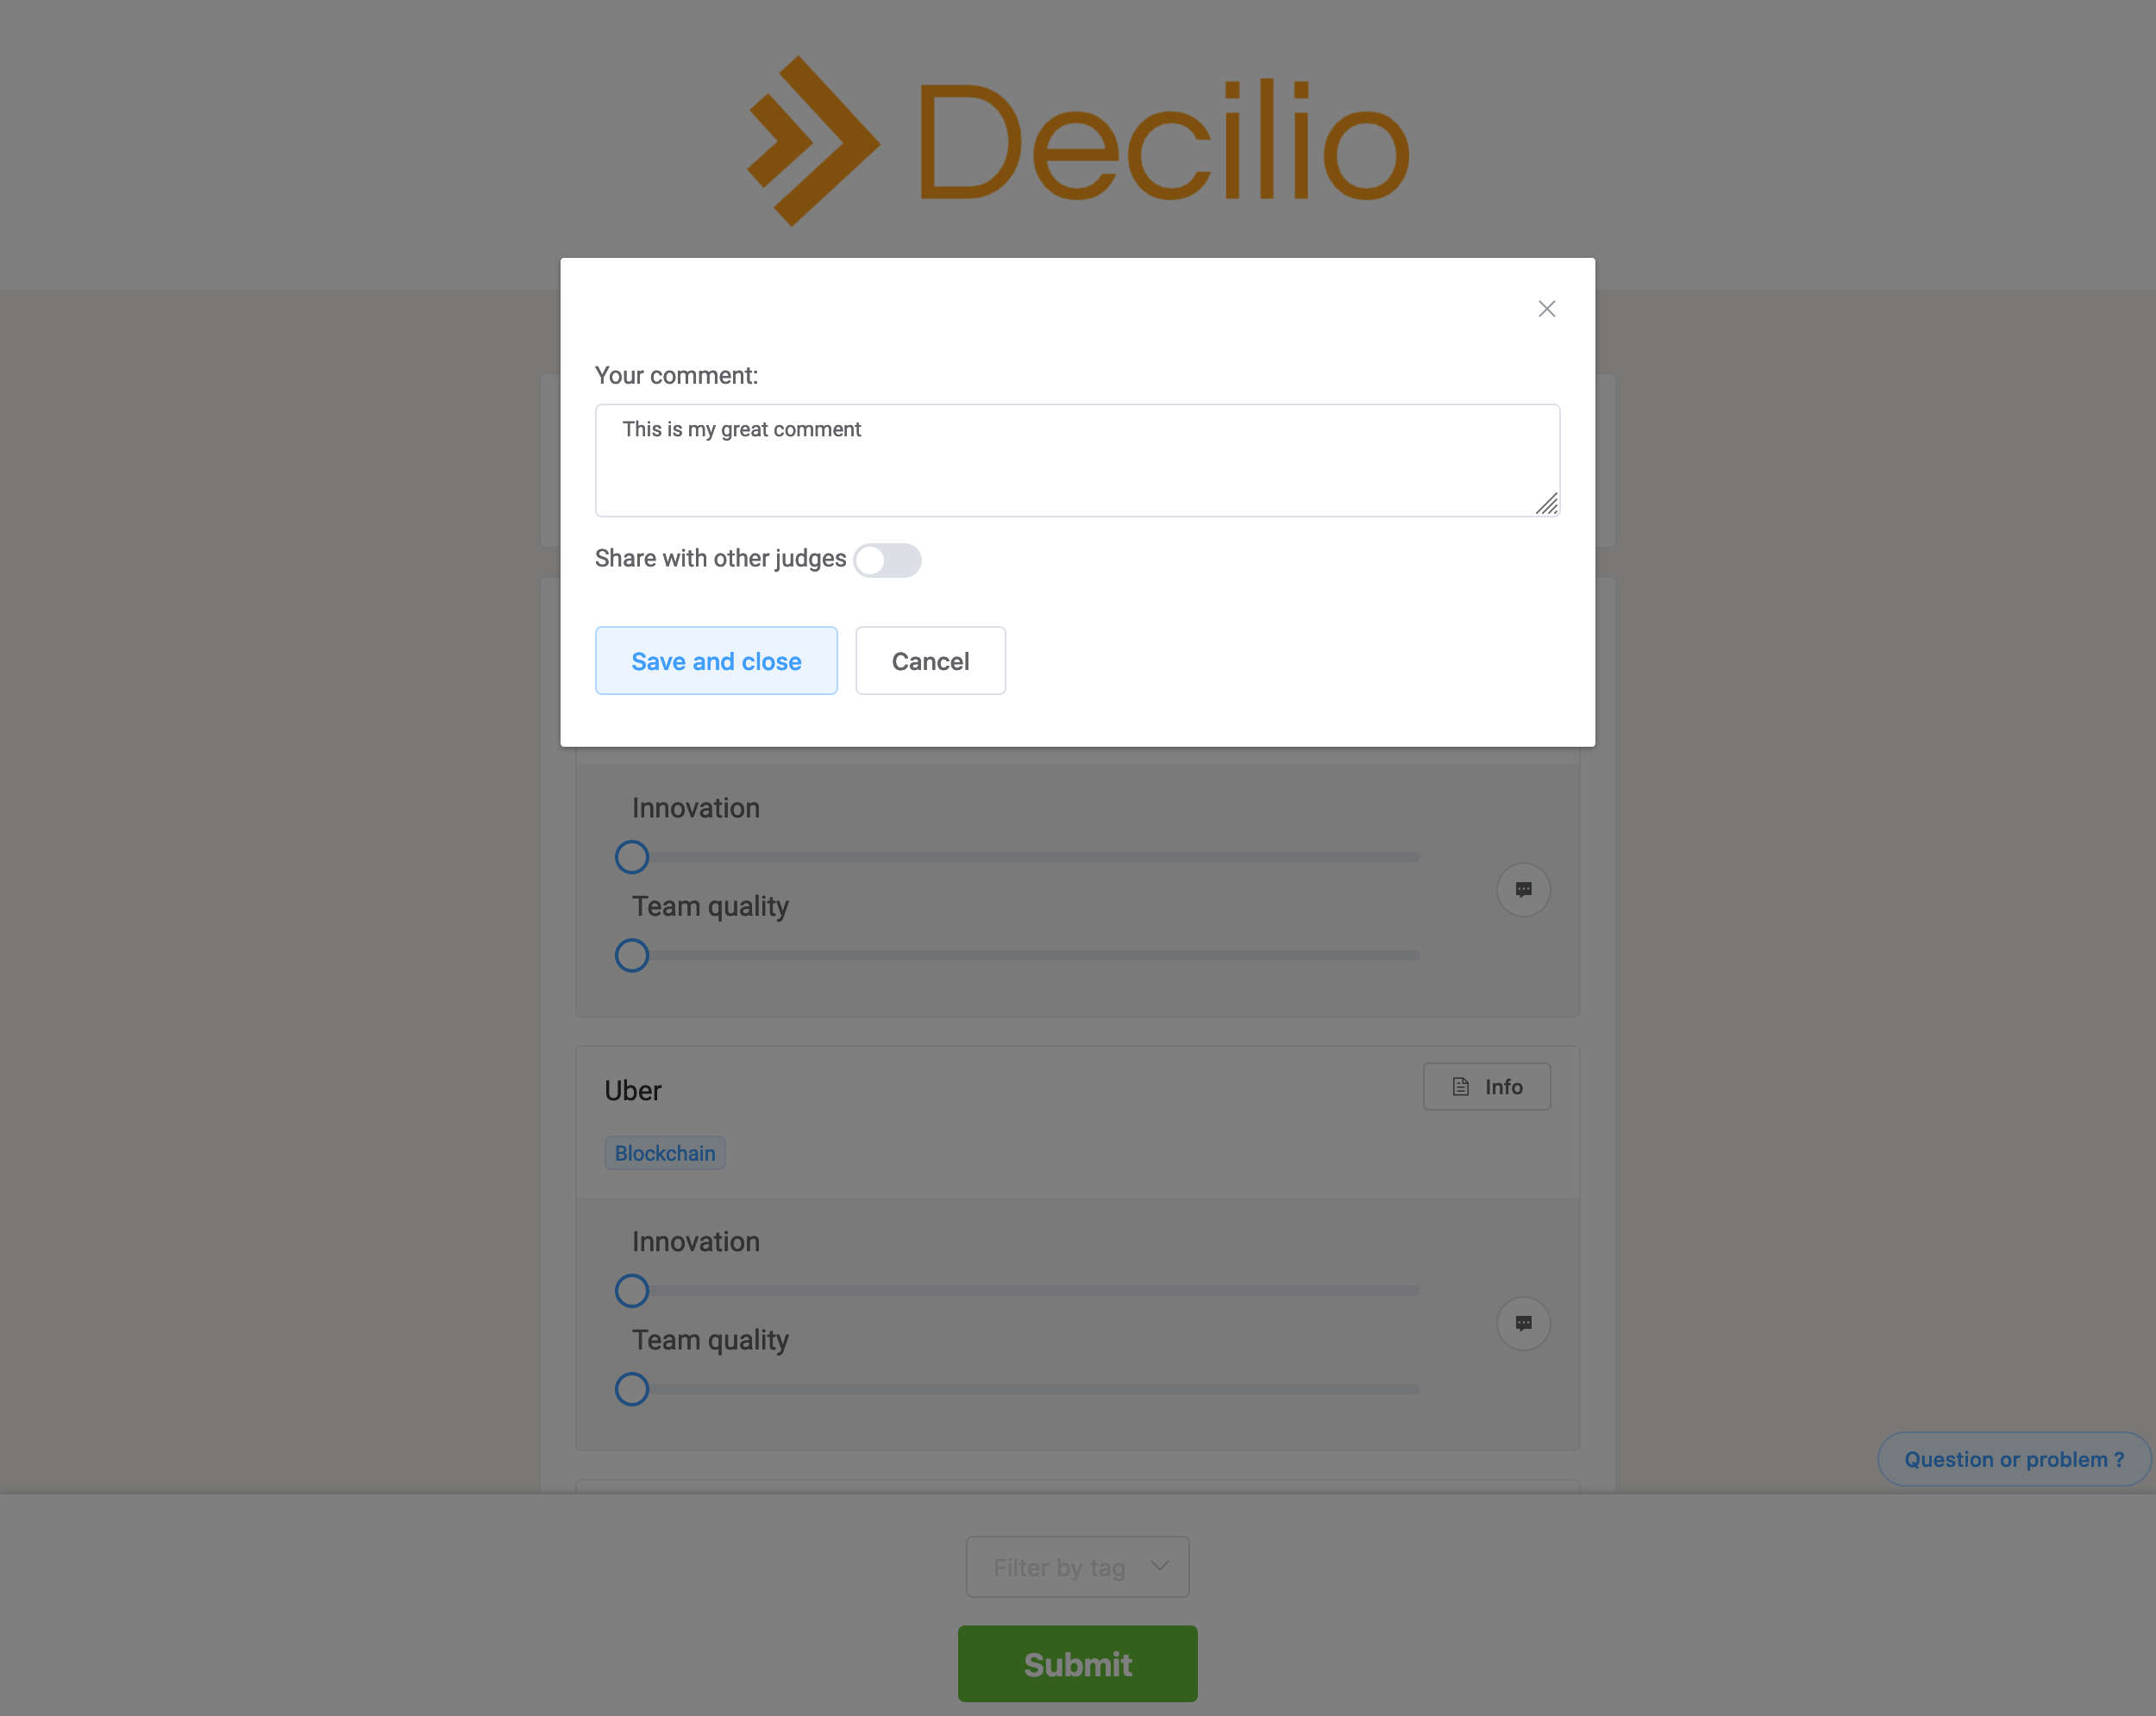 Decilio: how to post a comment